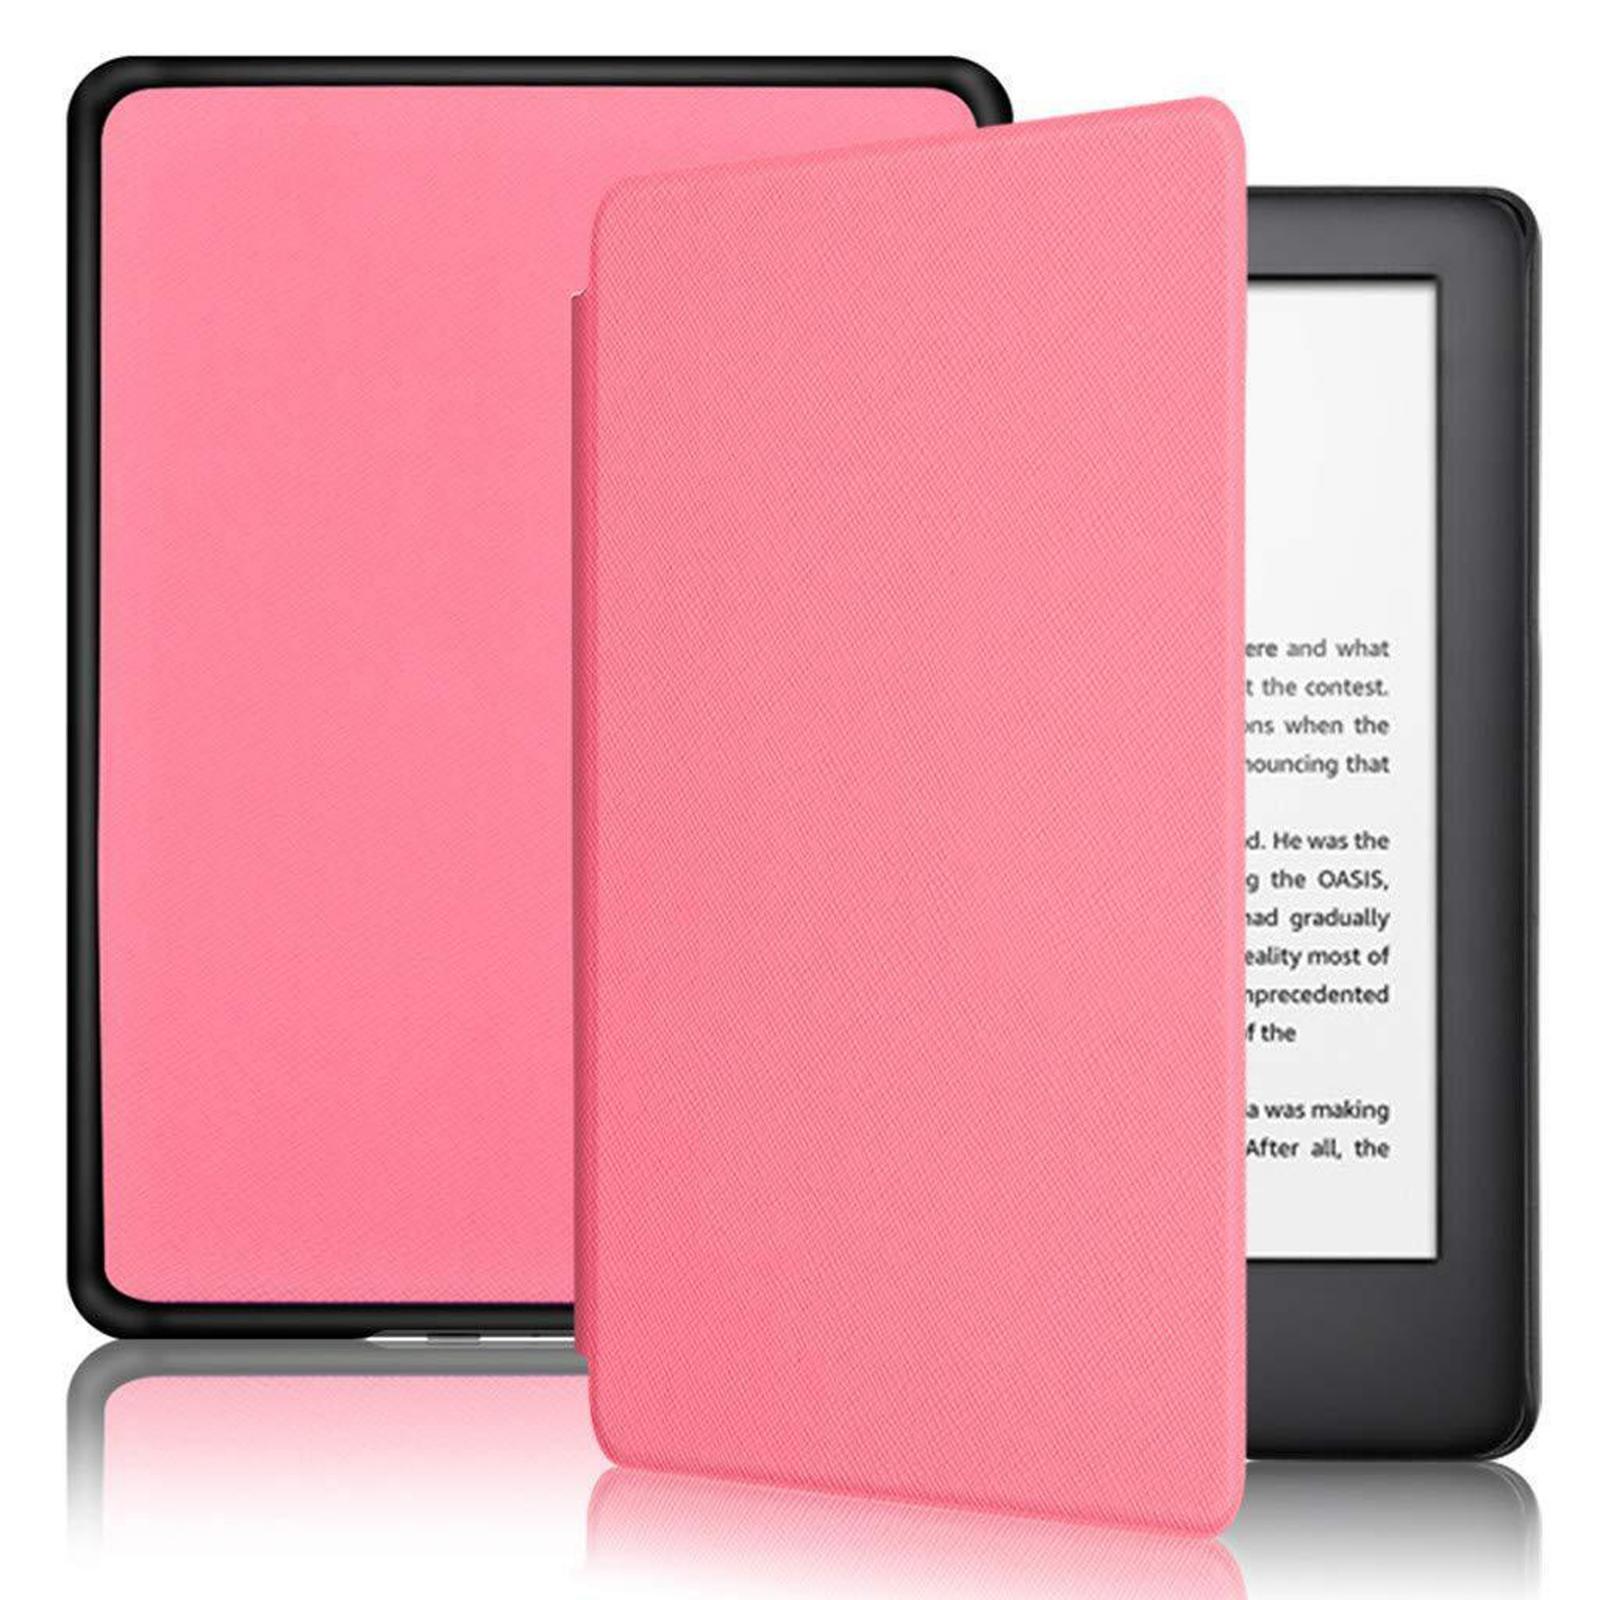 Fits All Paperwhite Generations Prior to 2018 Kids eBook Reader Sleeve Covers Smart Accessories PU Leather Kindle Protective Cases Auto Wake/Sleep